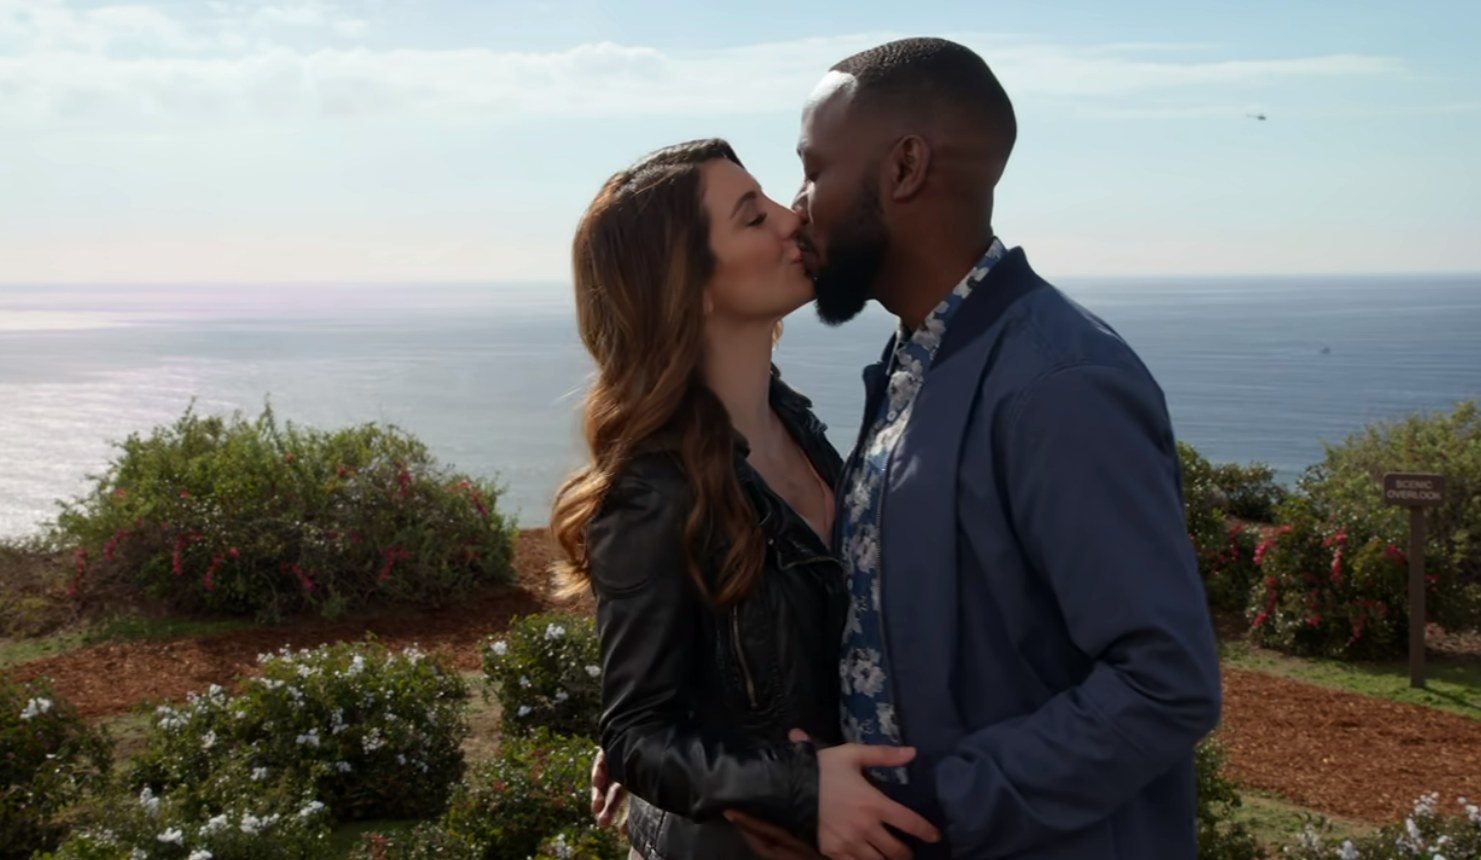 Aly and Winston kissing with the ocean in the background